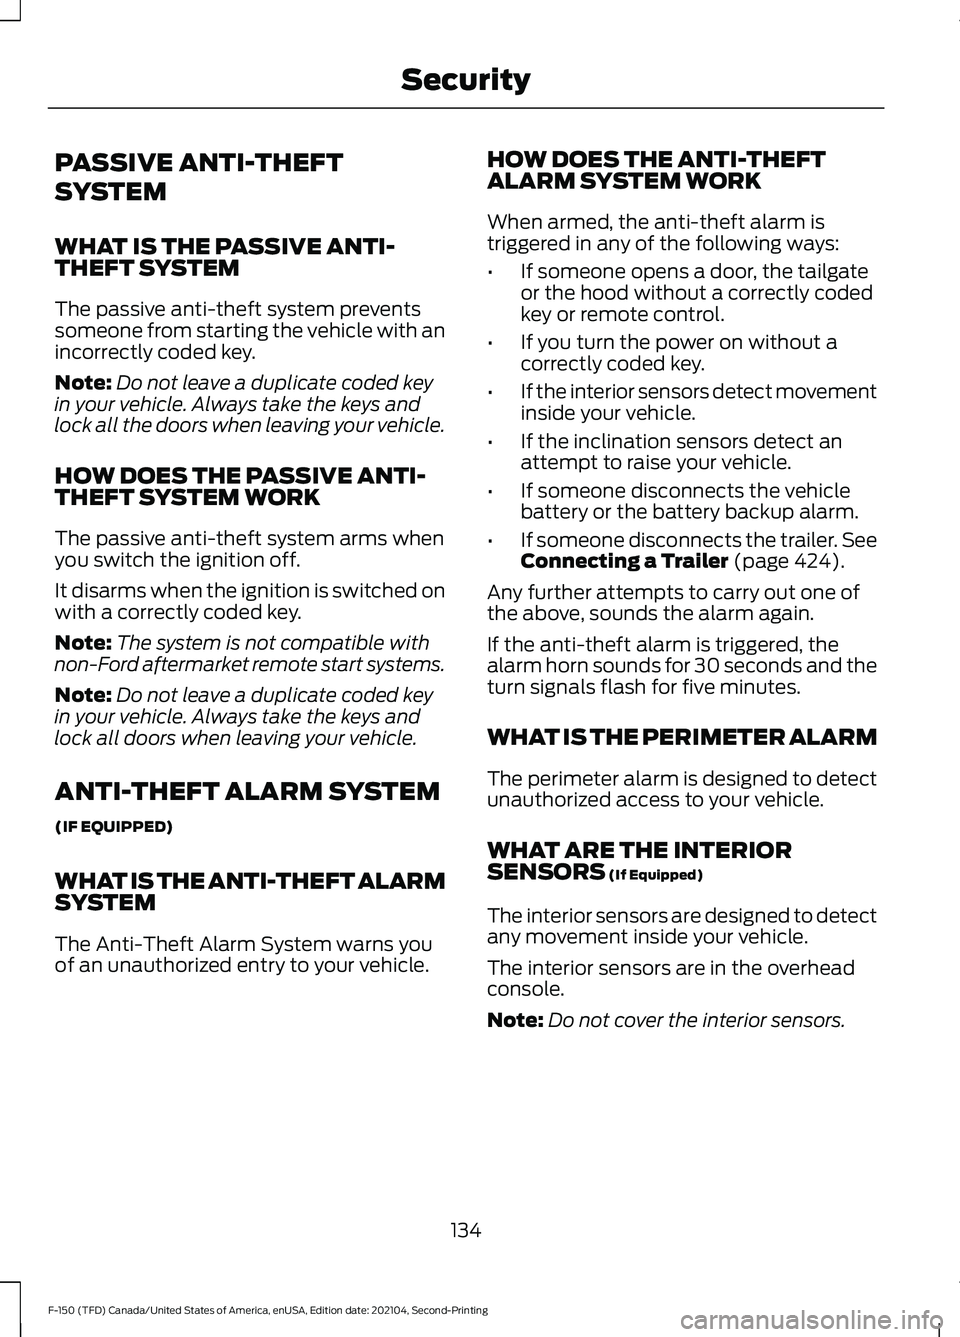 FORD F-150 2021  Owners Manual PASSIVE ANTI-THEFT
SYSTEM
WHAT IS THE PASSIVE ANTI-
THEFT SYSTEM
The passive anti-theft system prevents
someone from starting the vehicle with an
incorrectly coded key.
Note:
Do not leave a duplicate 